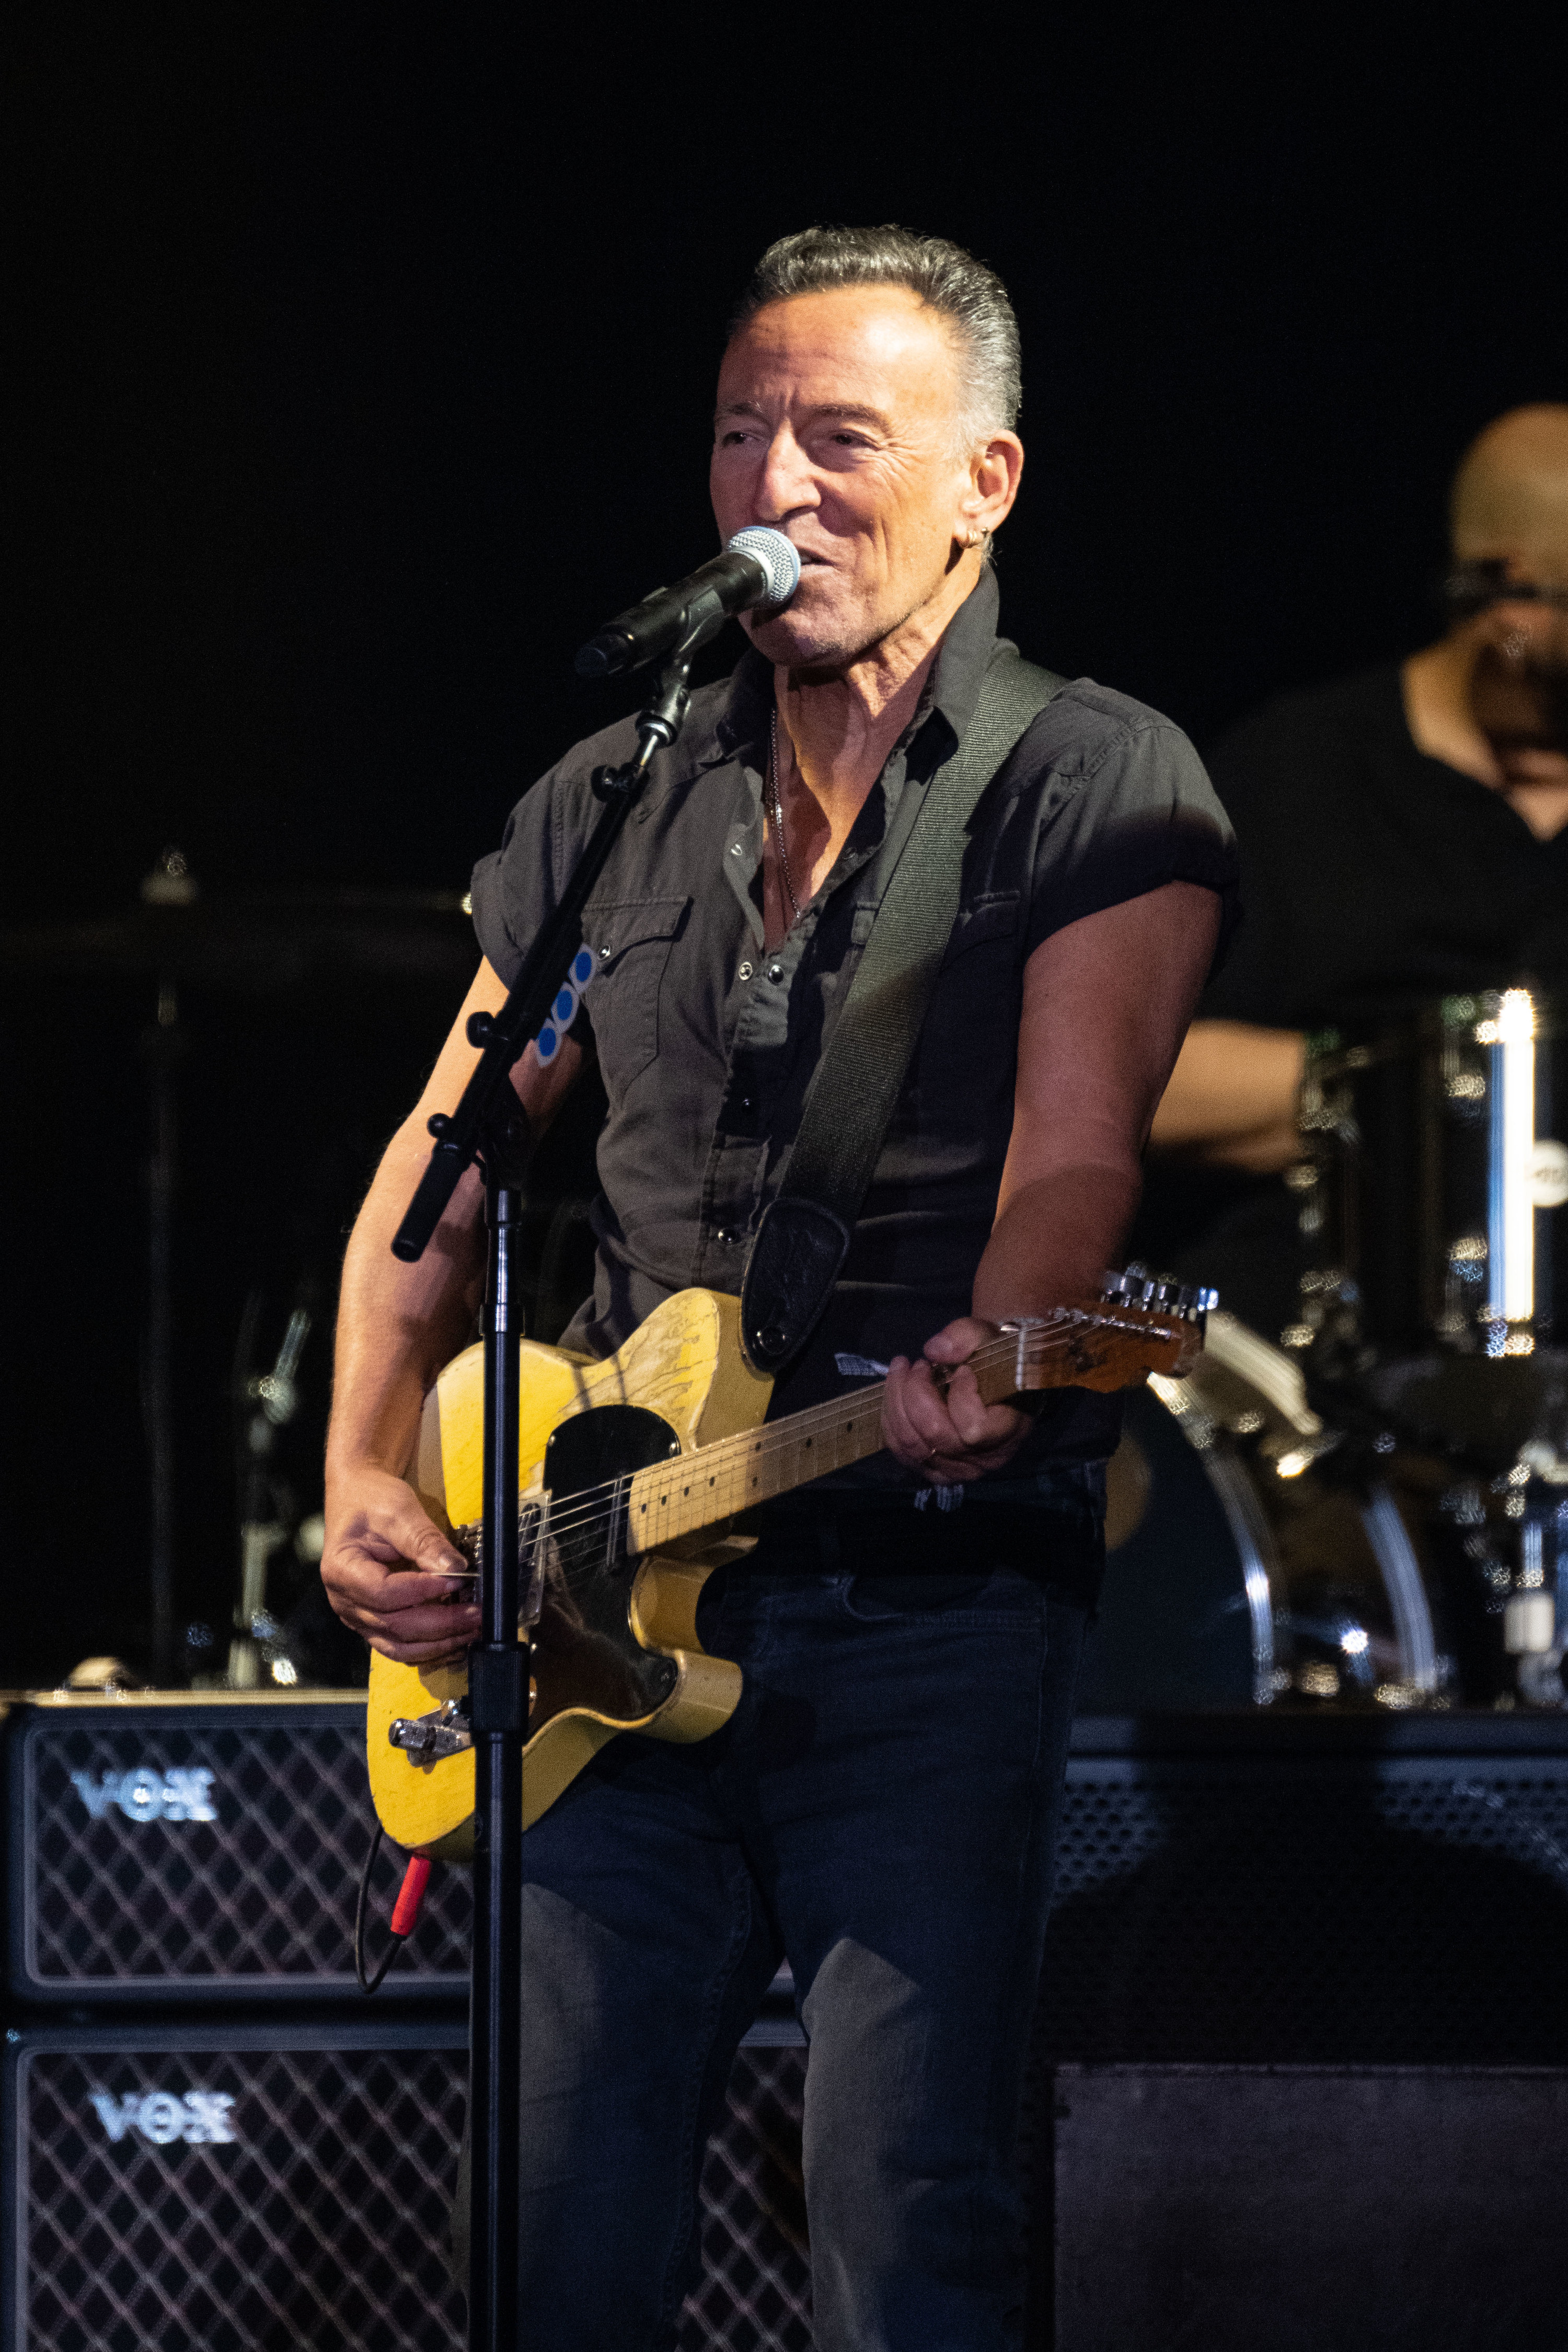 Springsteen playing guitar and singing onstage